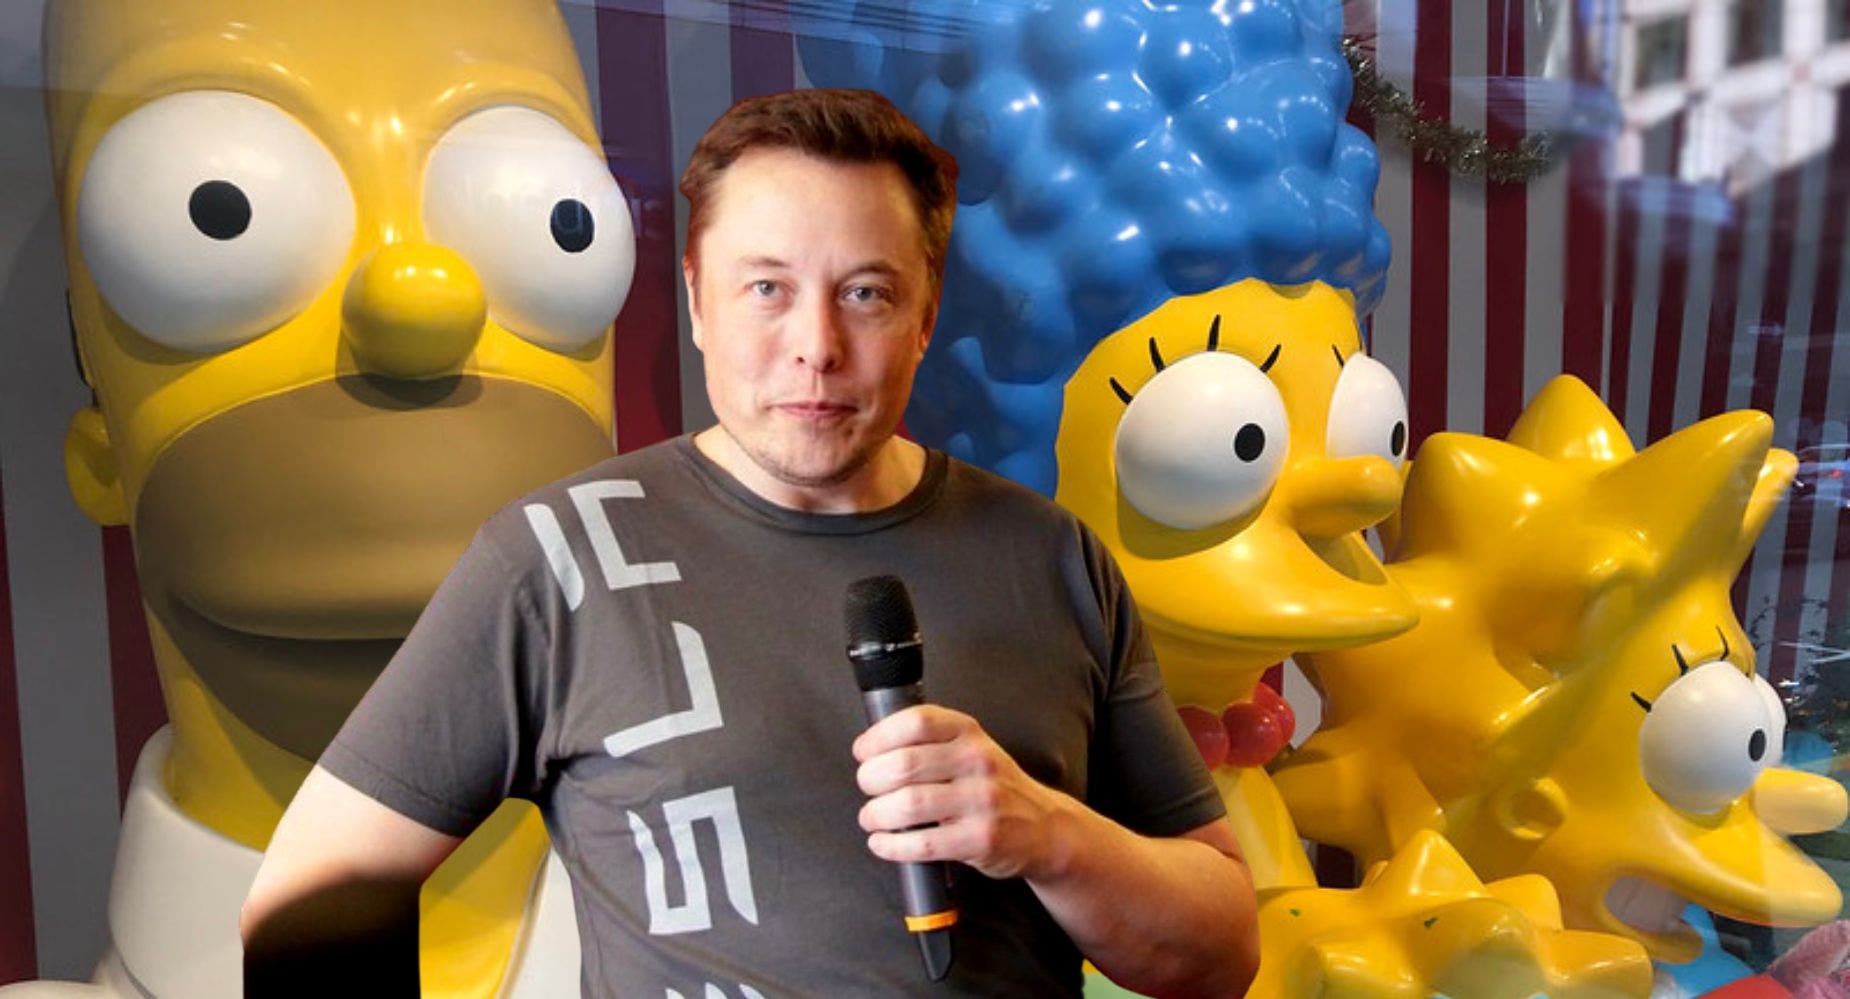 If You Invested $1,000 In Tesla Stock After Elon Musk Appeared On 'The Simpsons,' Here's How Much You'd Have Now